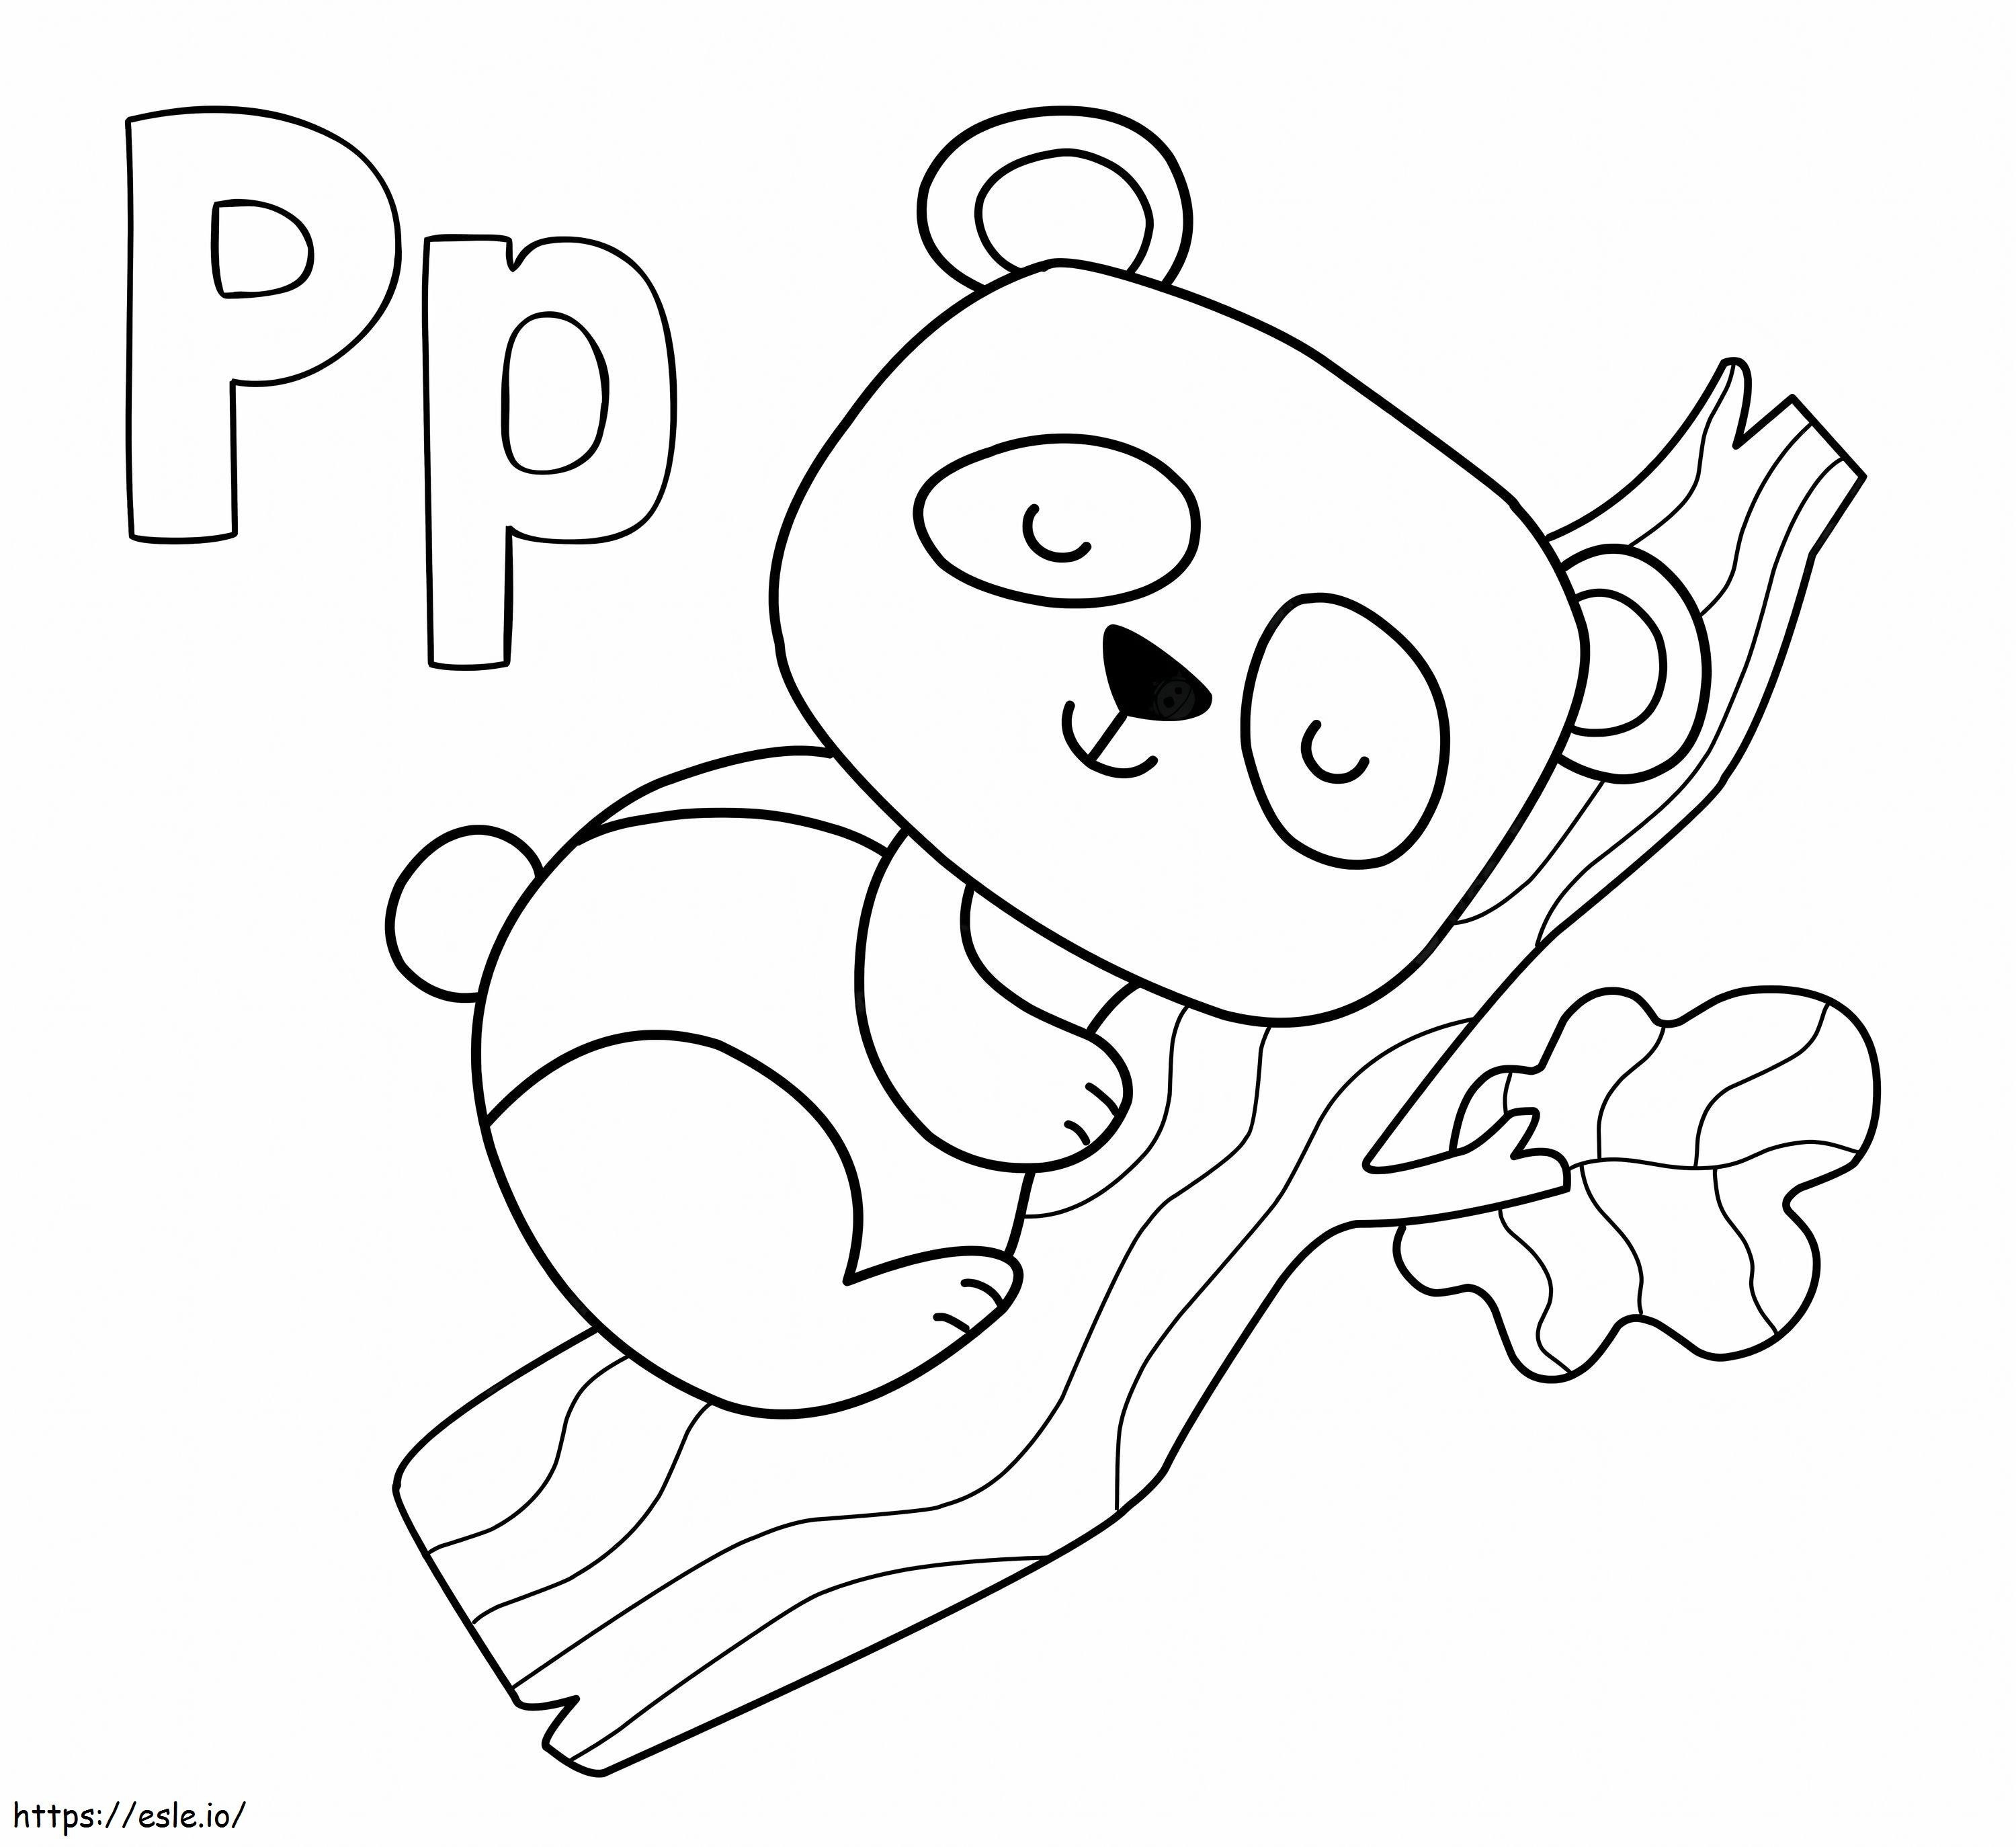 Letter P With Panda coloring page